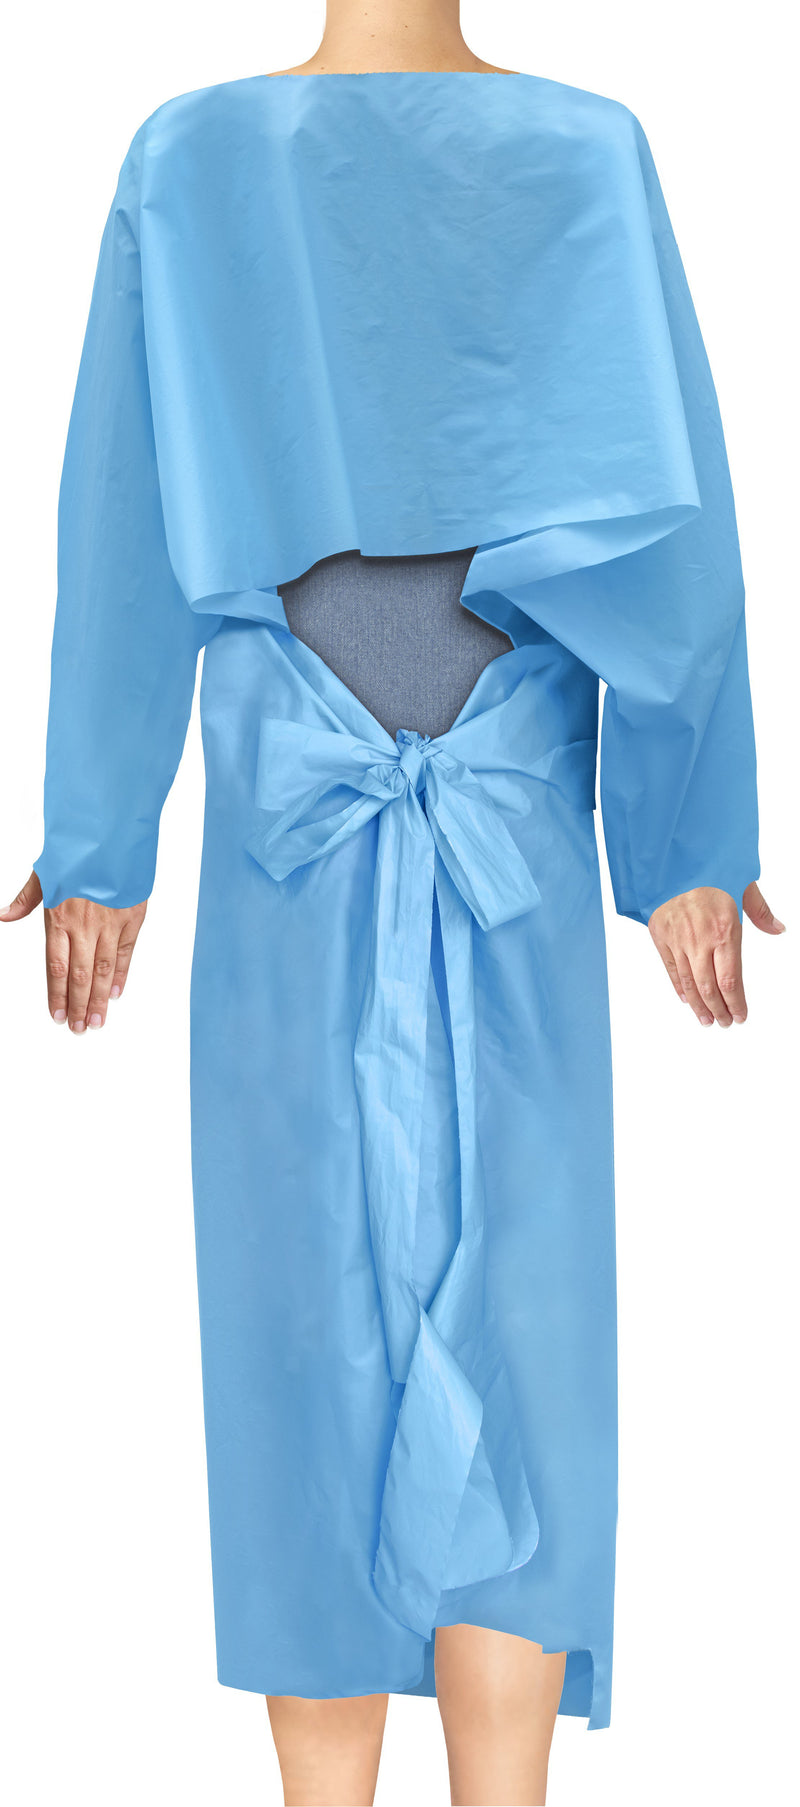 McKesson Open Back Over-the-Head Protective Procedure Gown, Universal, Blue